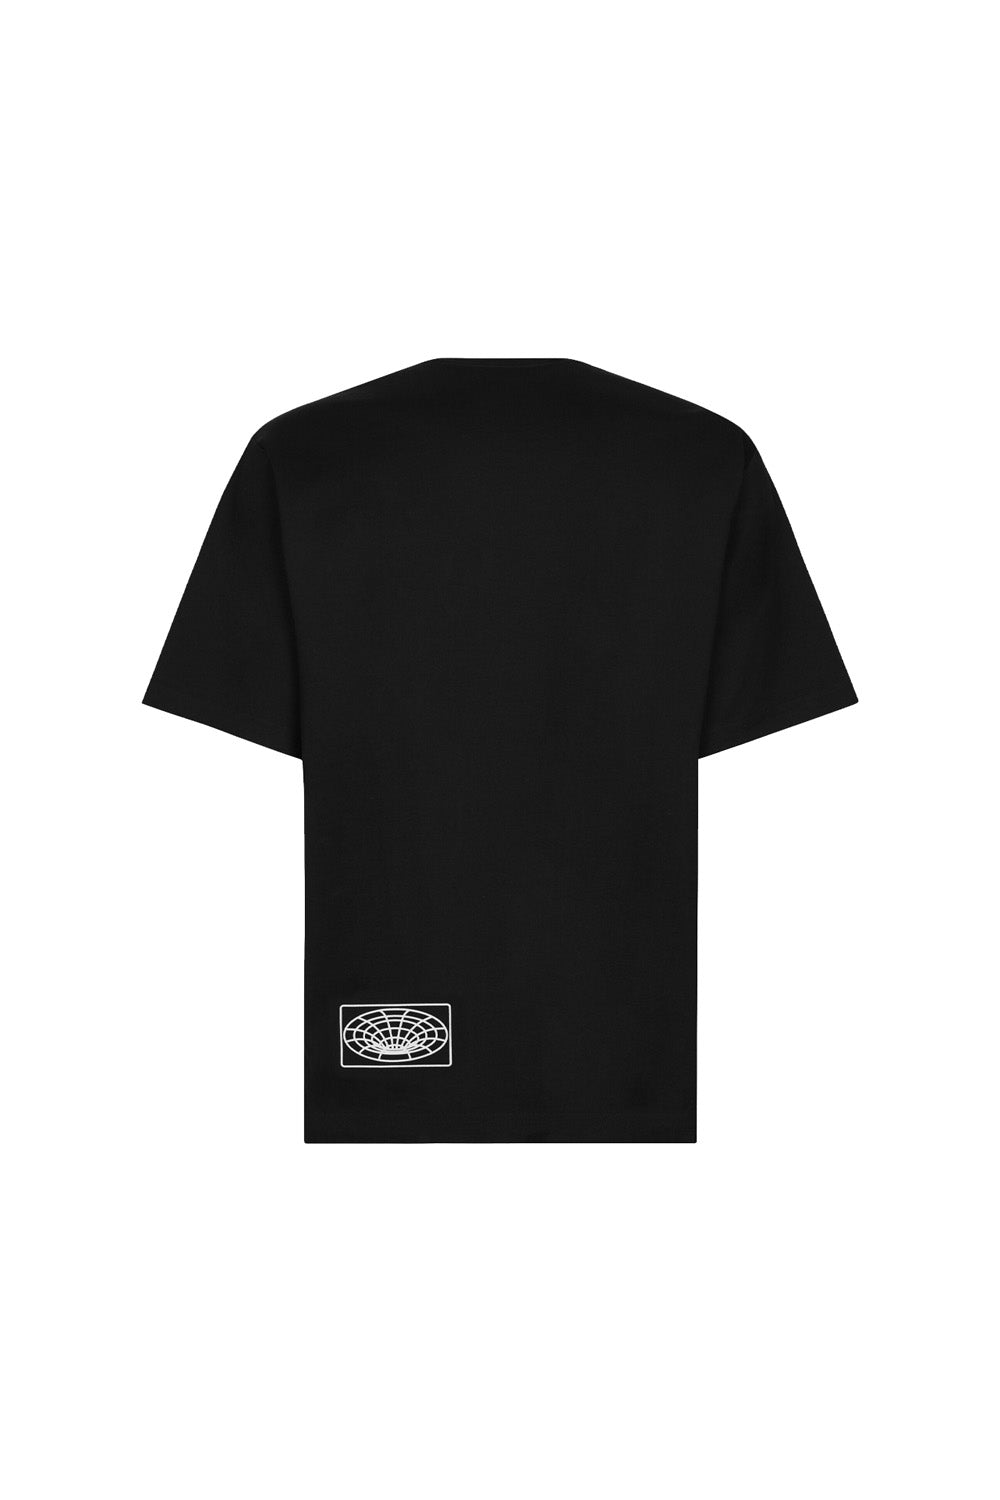 Dolce & Gabbana Cotton T-shirt with DG logo embroidery and print